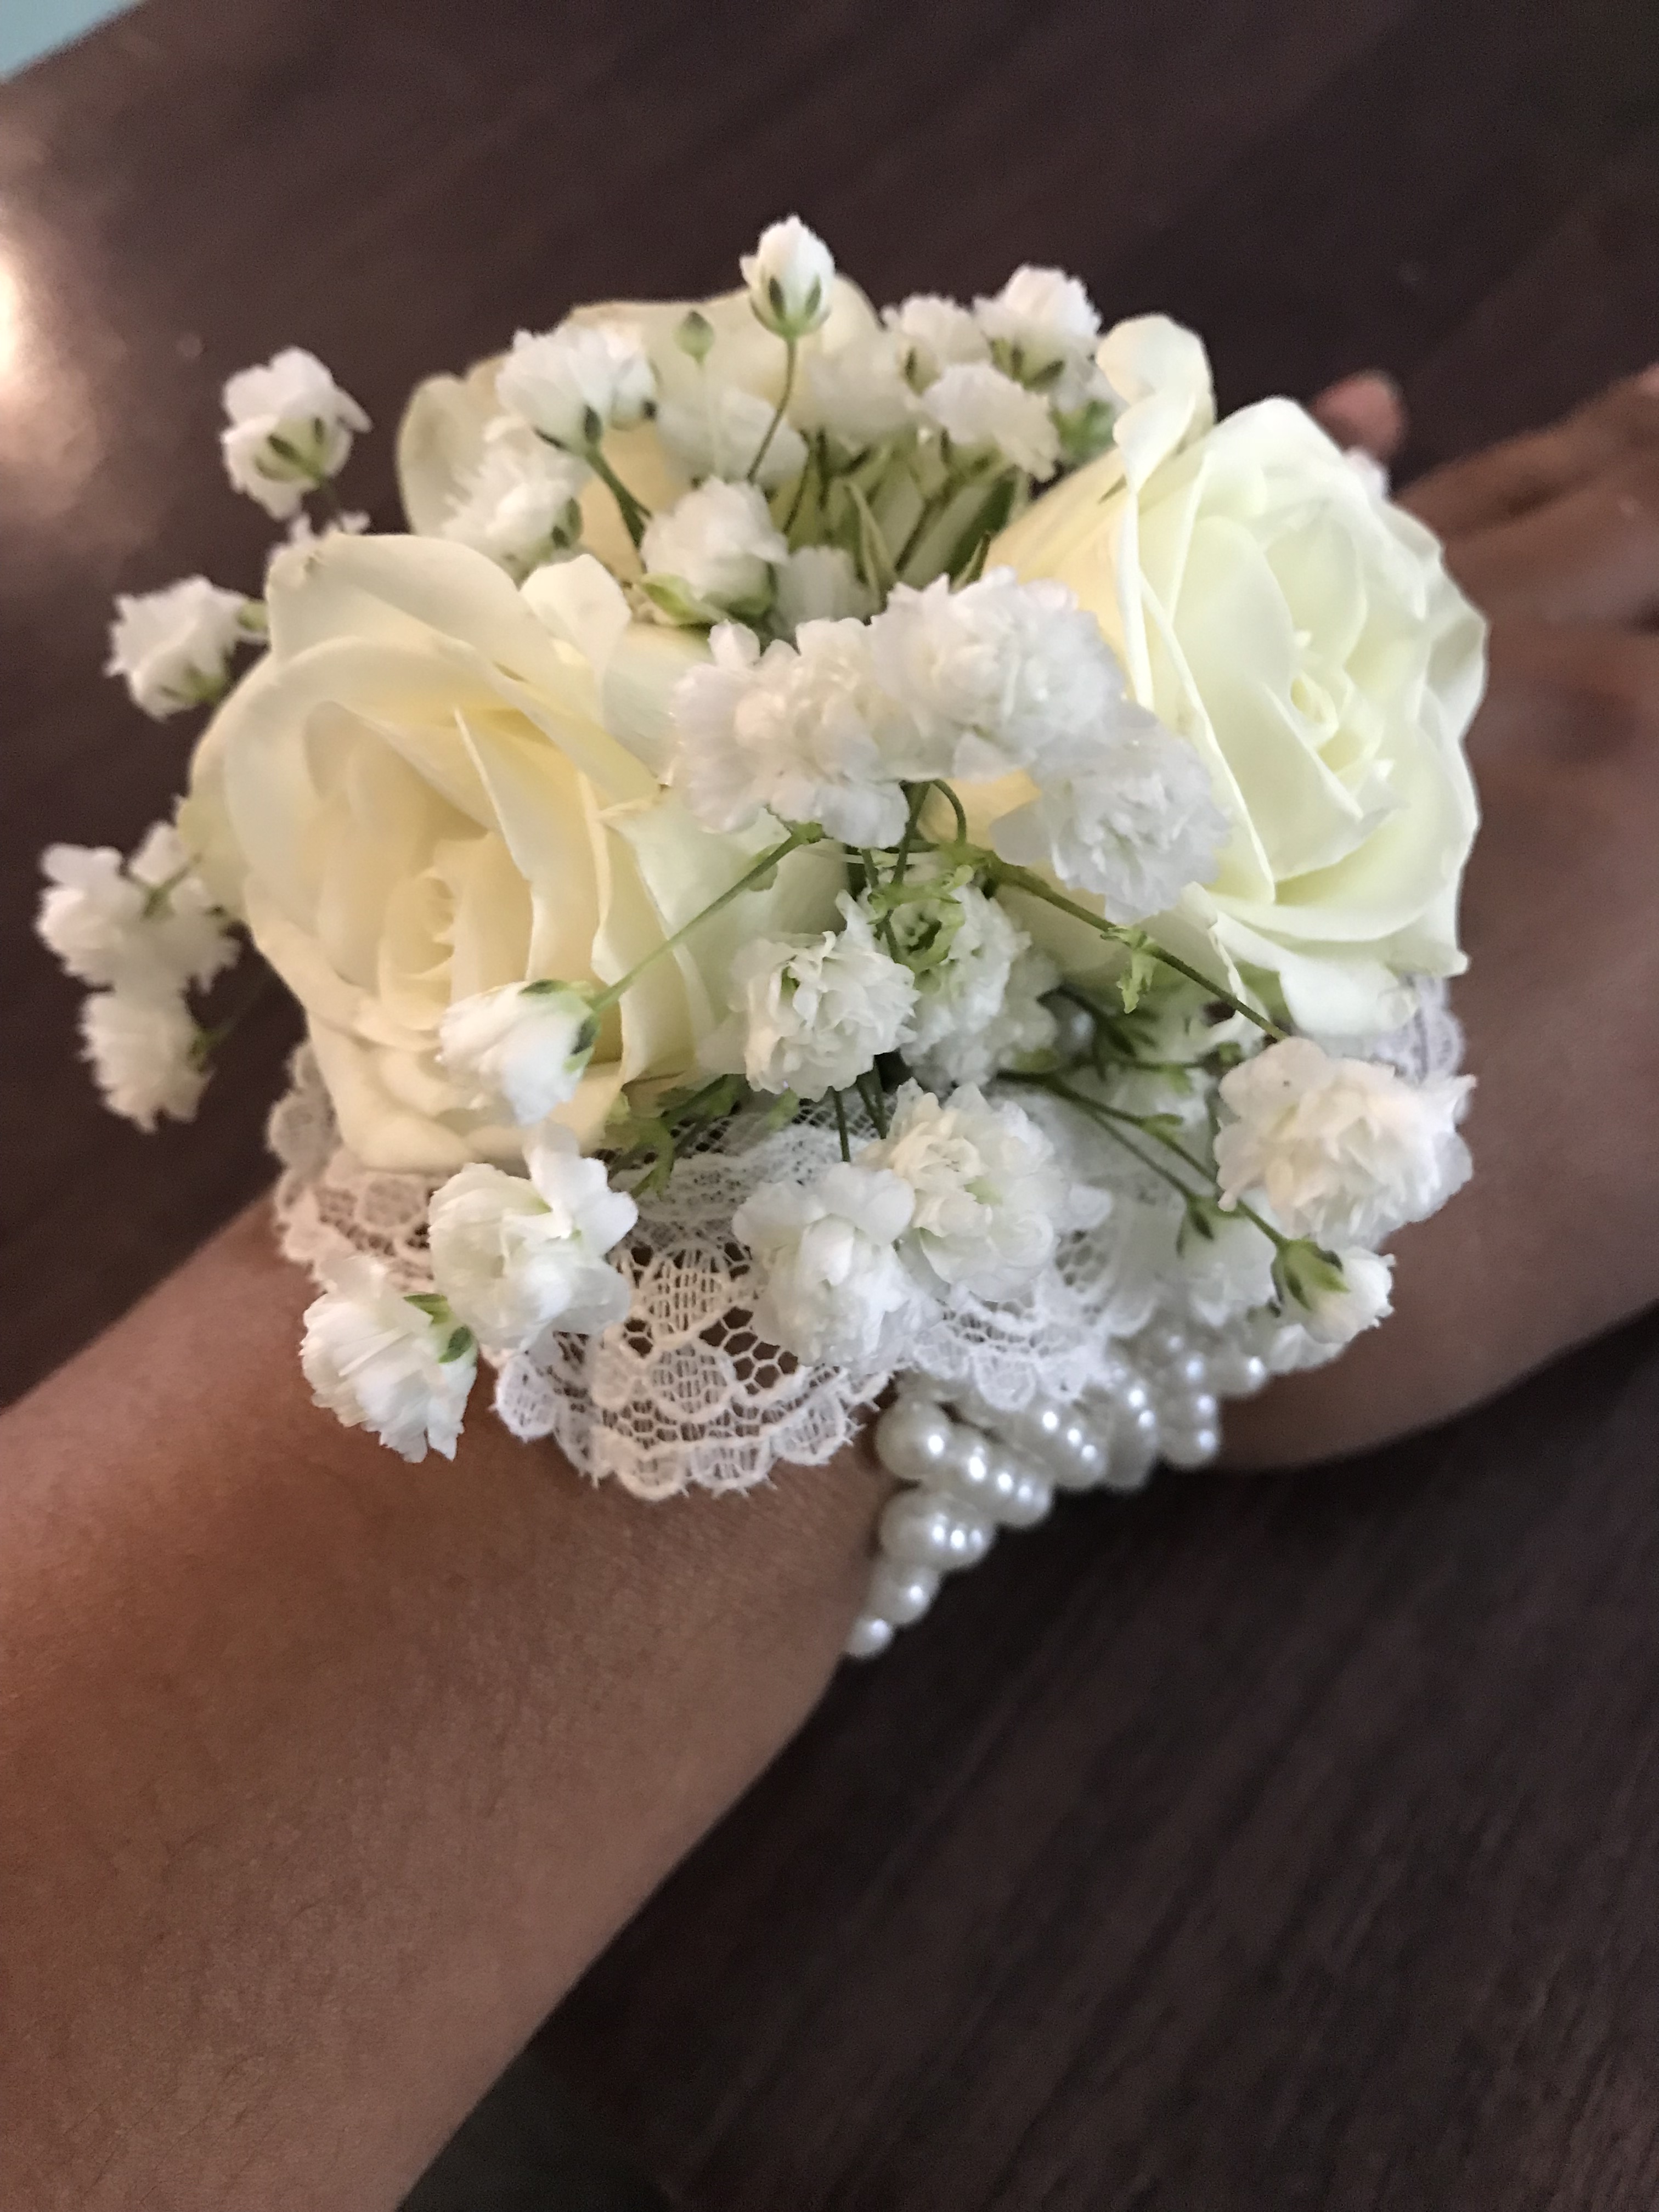 White and ivory corsages and babys breath